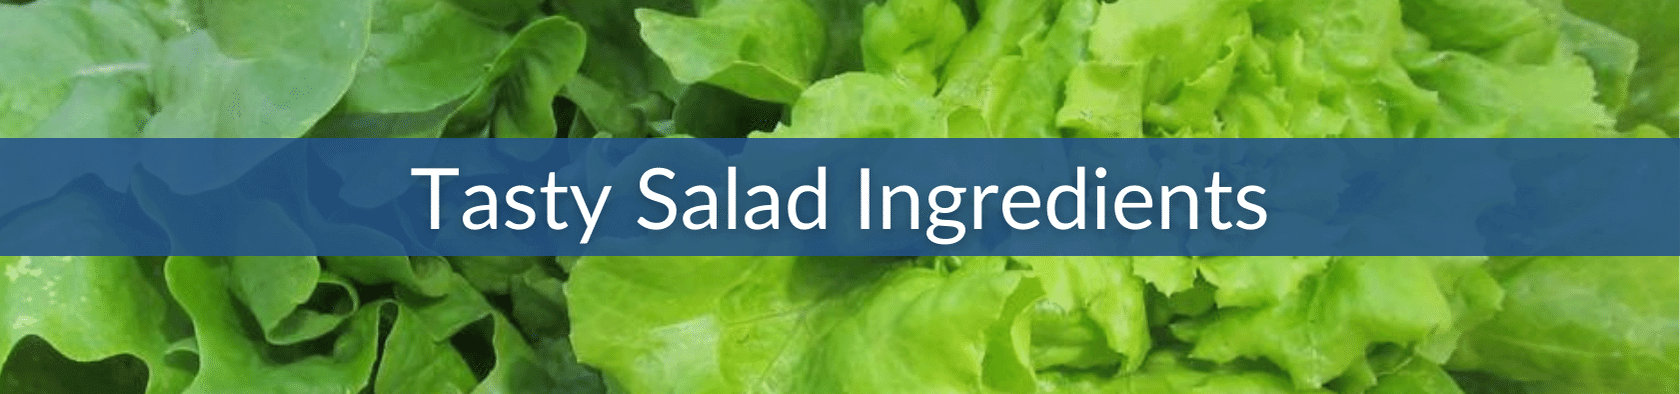 Salad Collection (1).png__PID:d6d5707c-2e93-4132-9560-31aafd0b49f1